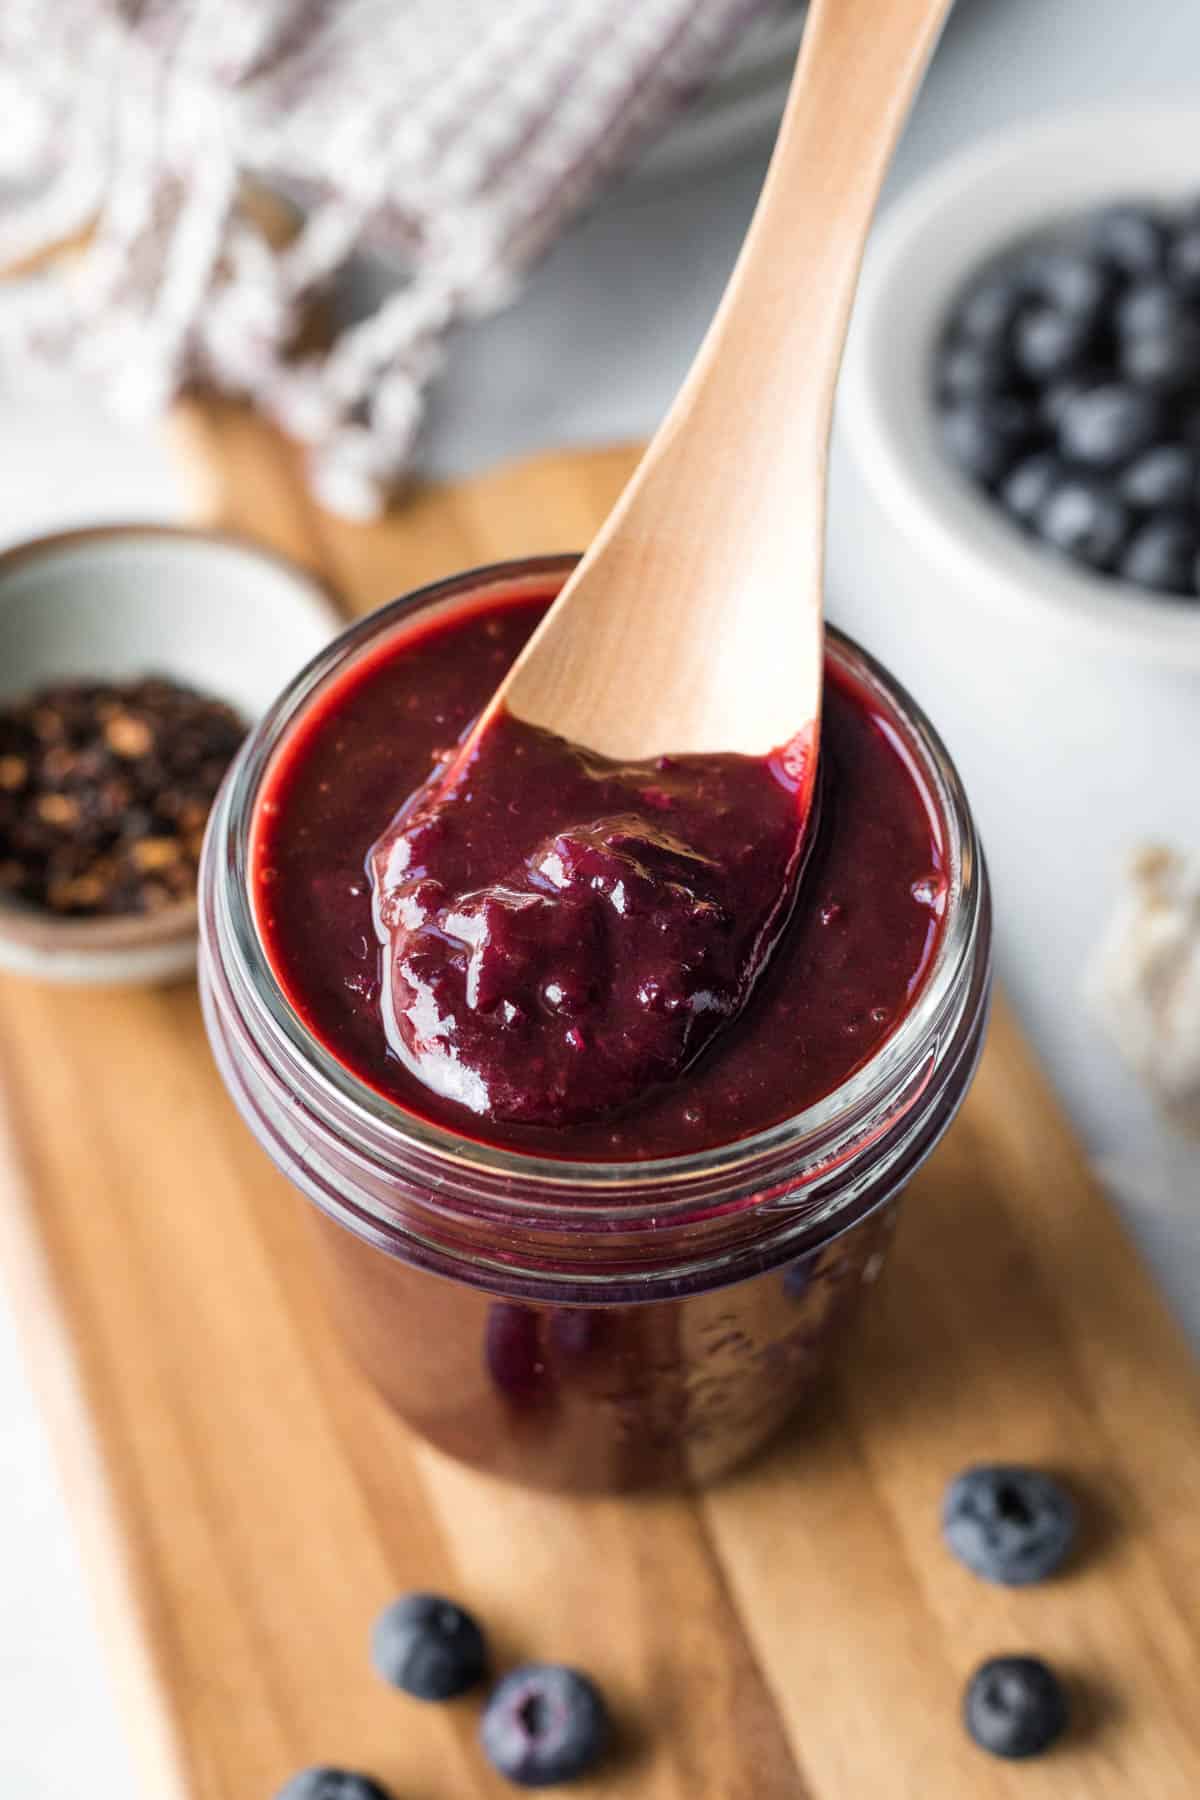 Colorful and thick blueberry barbecue sauce in a glass jar with blueberries in background.